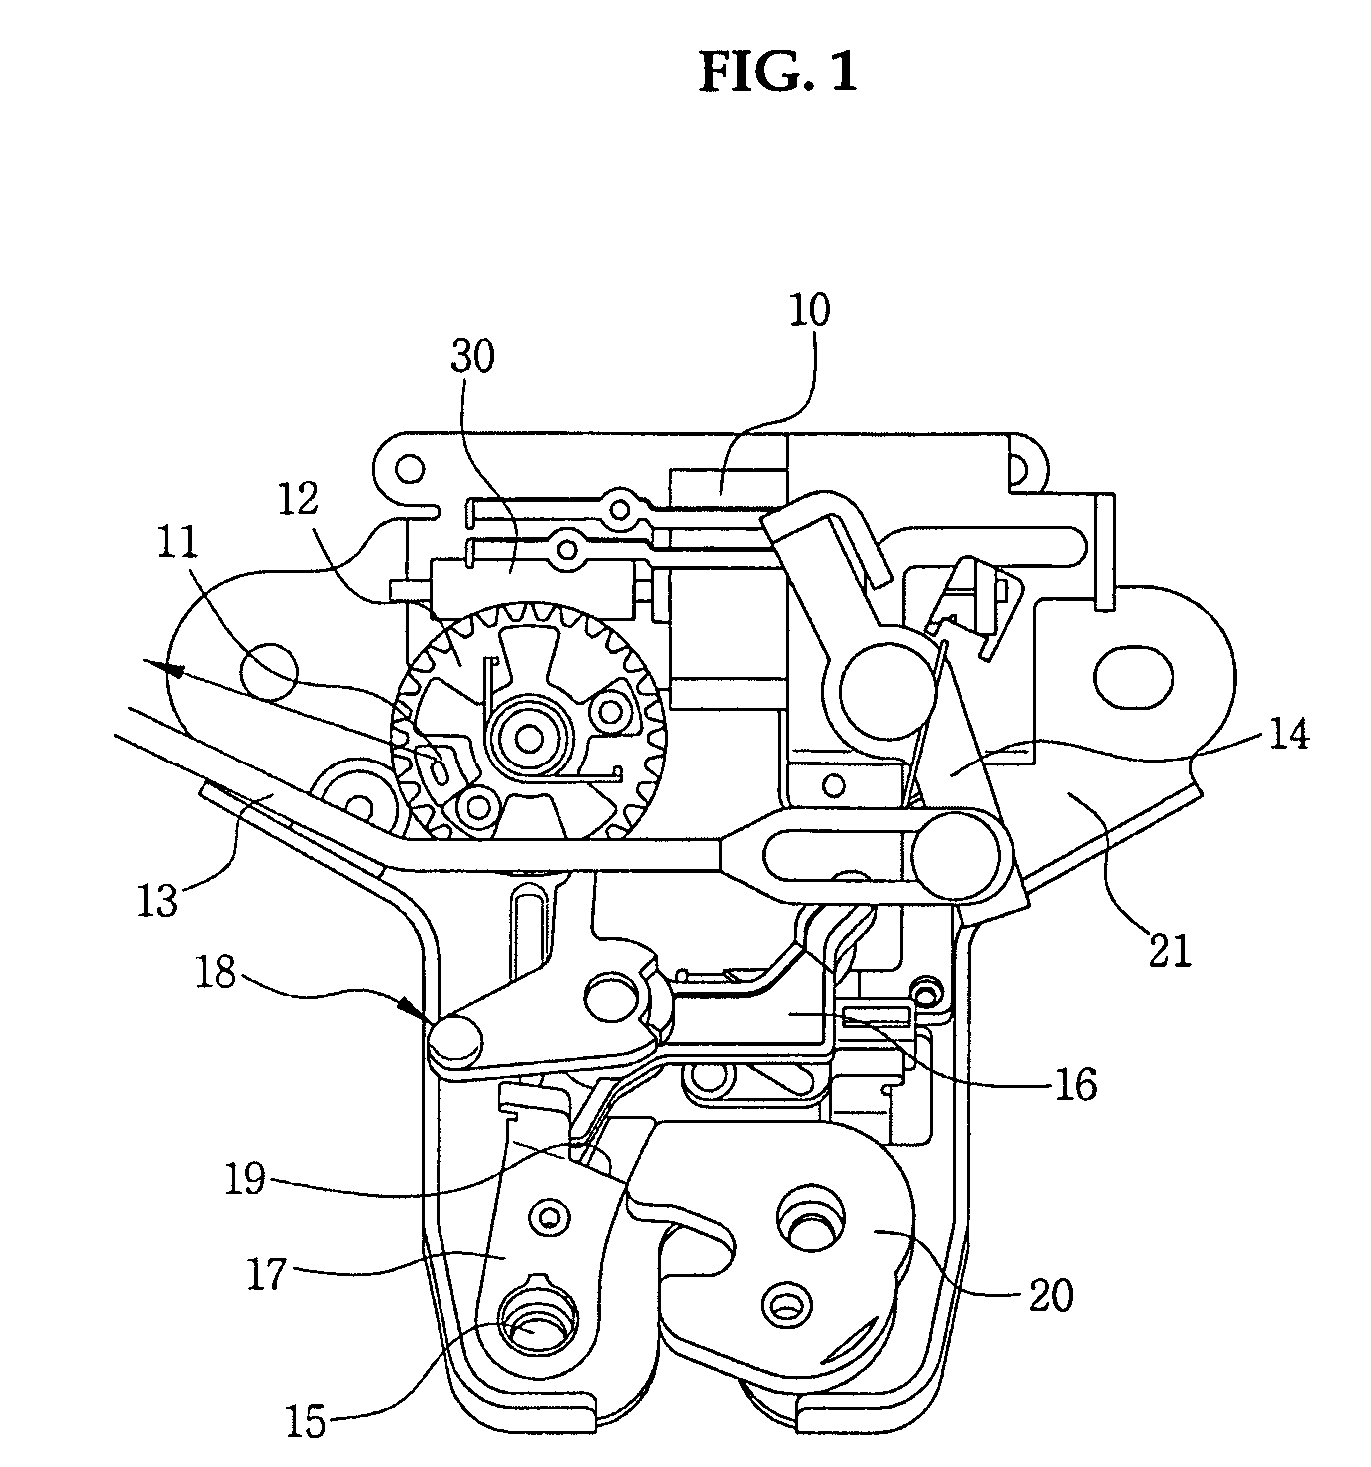 Trunk lid latch assembly for vehicle